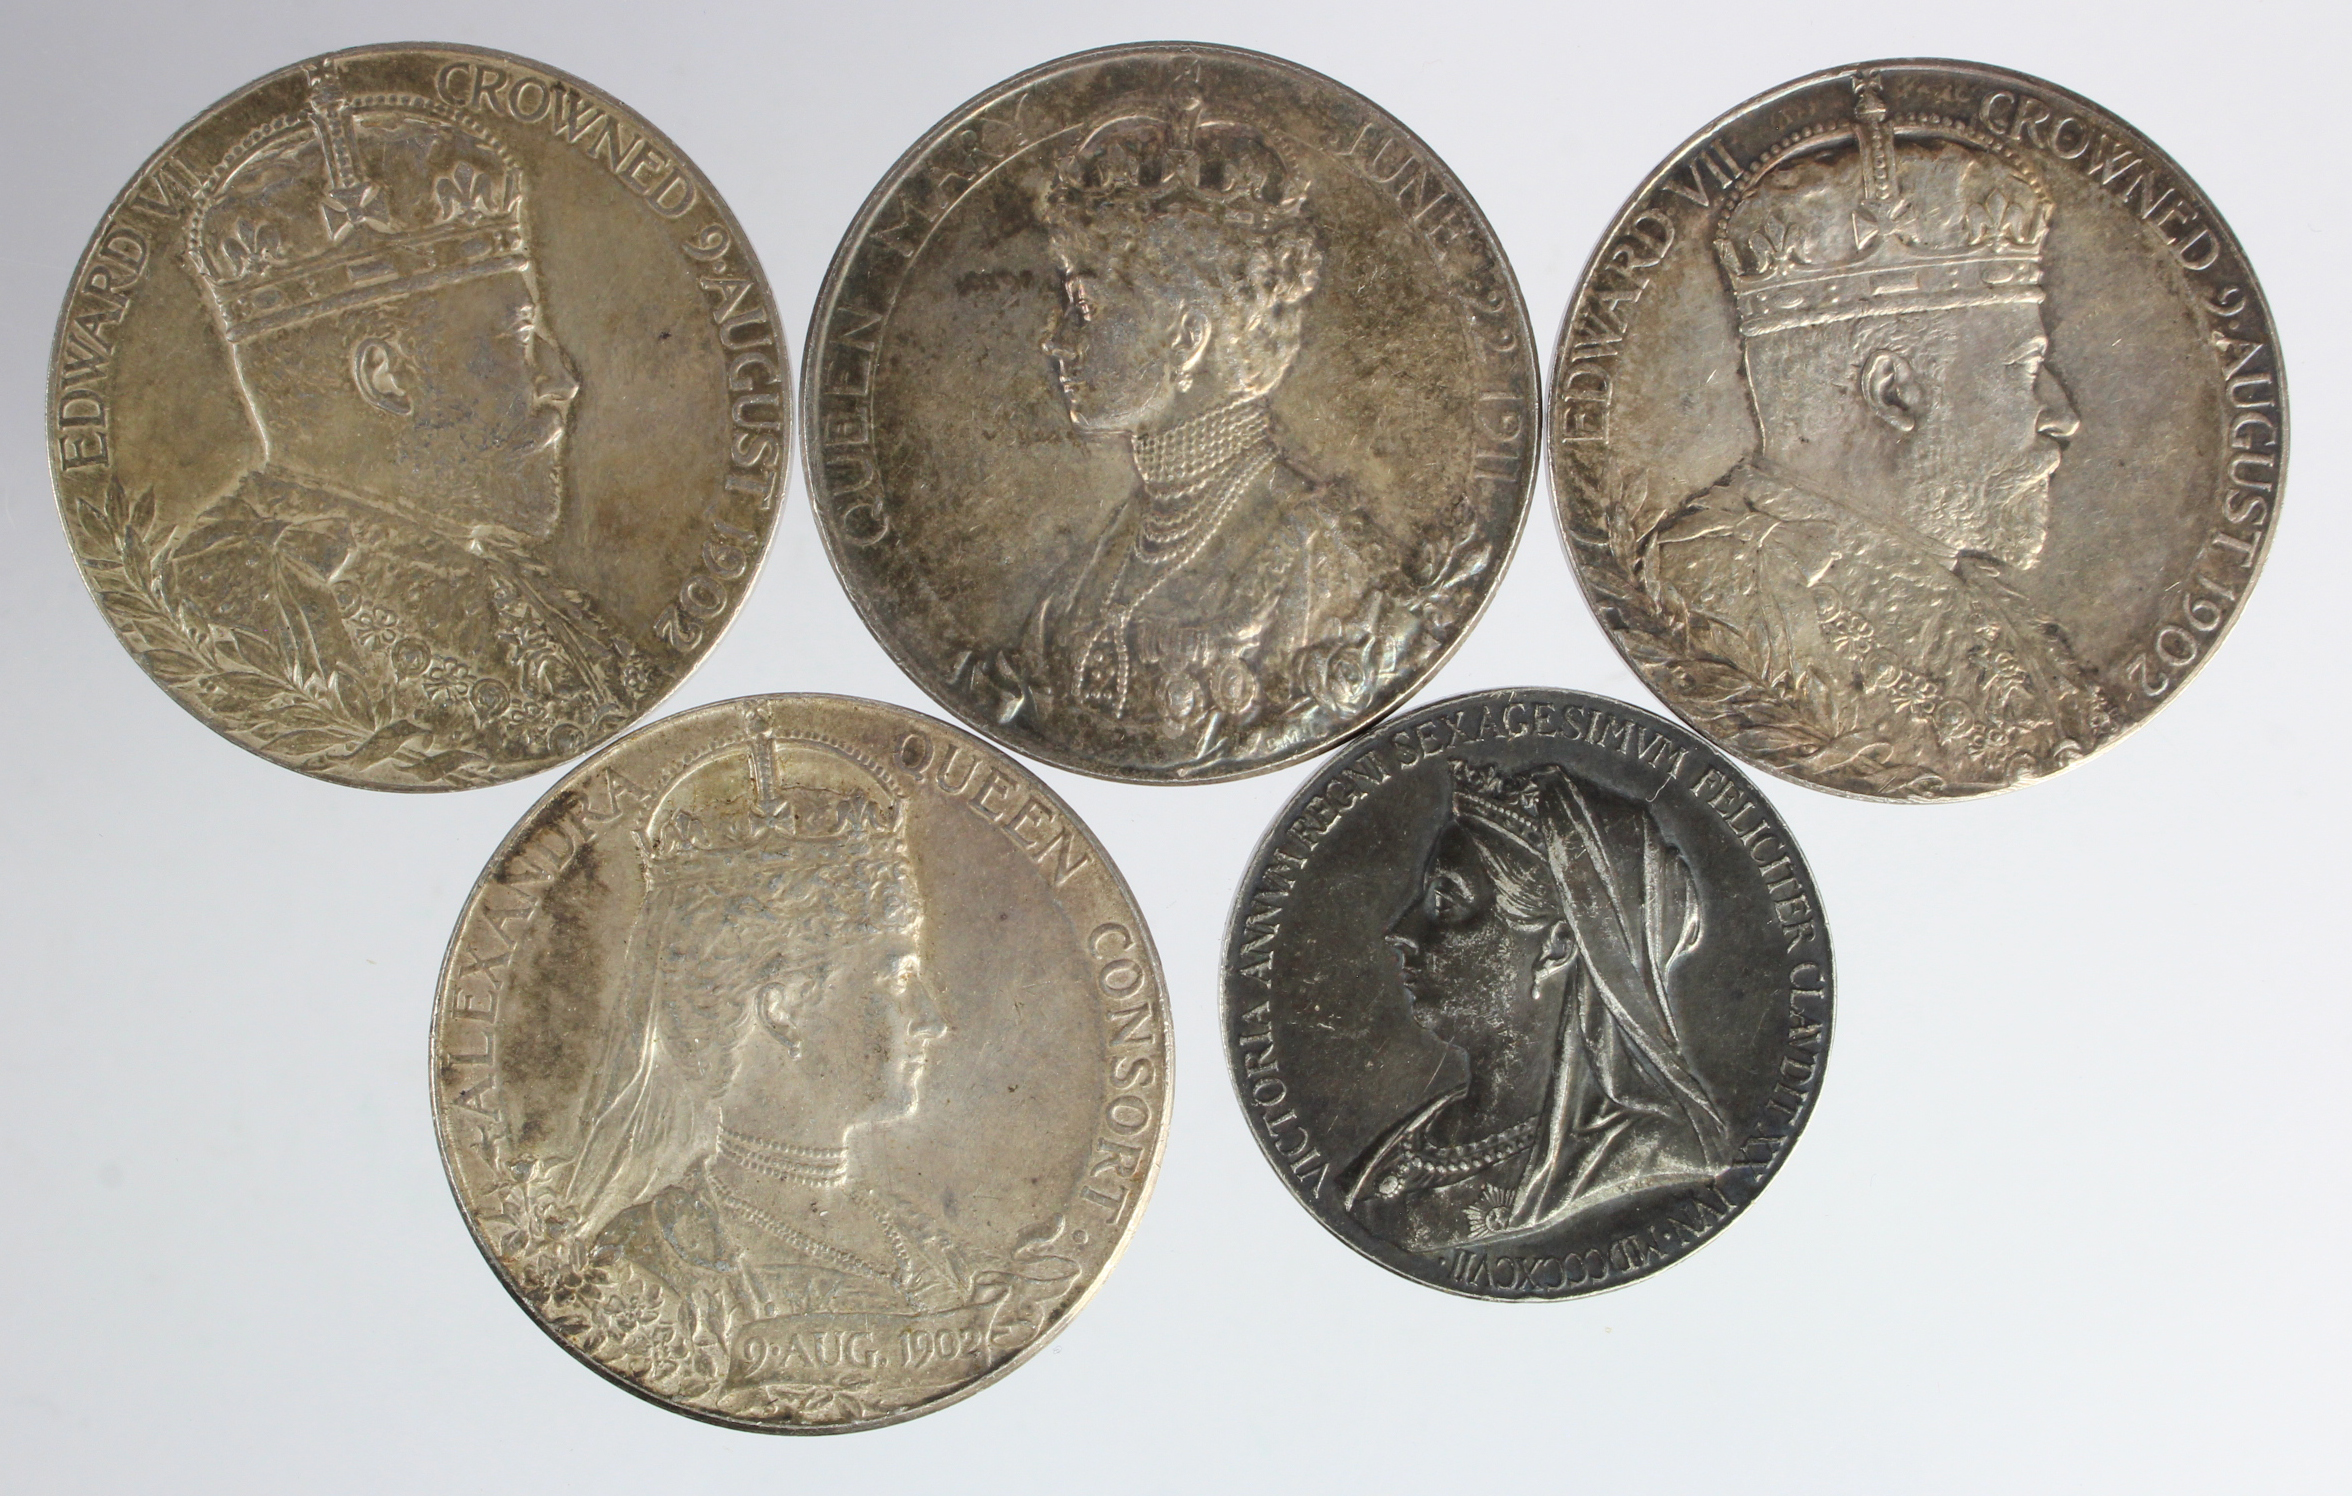 British Commemorative Medals (5) official small silver issues: QV Diamond Jubilee 1897, 3x Edward